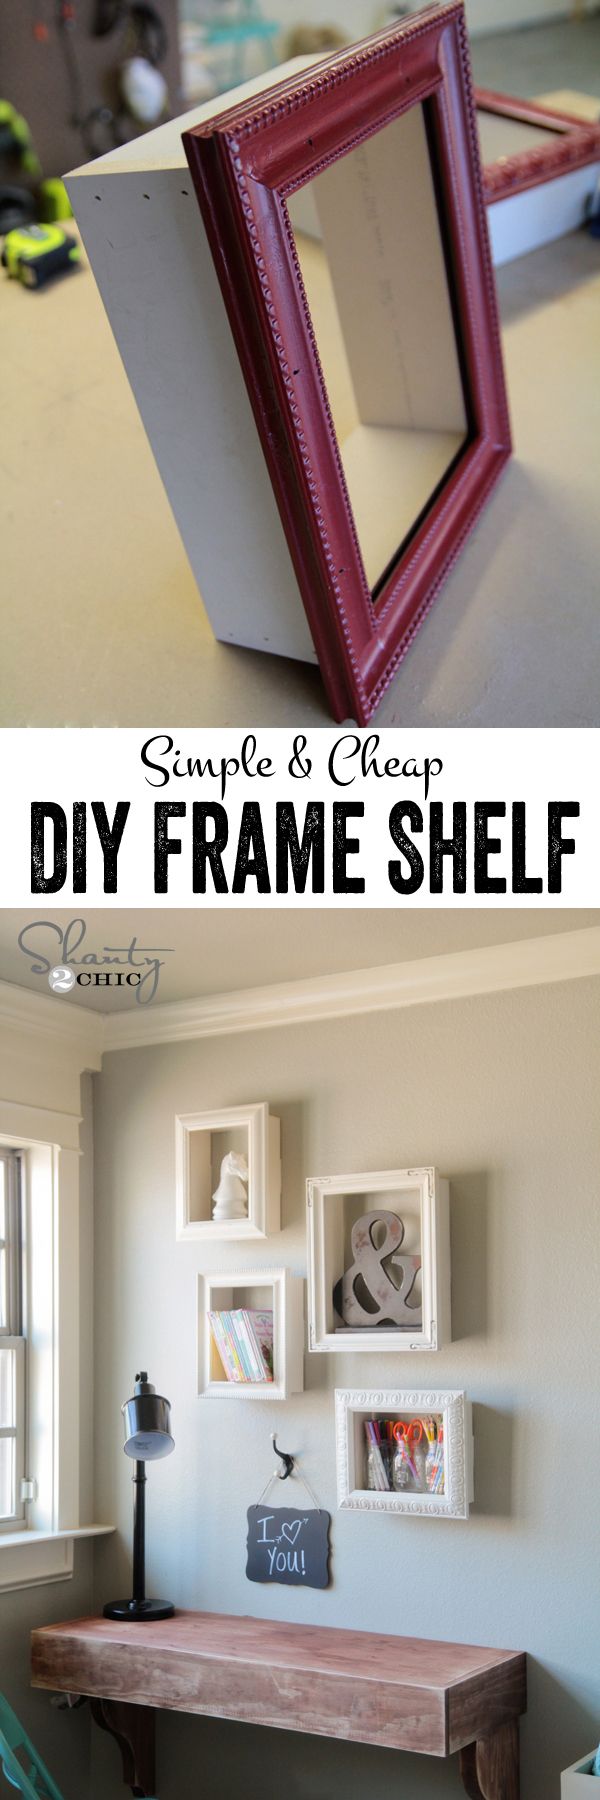 Incorporate Trends into Thrift Store Frames. 